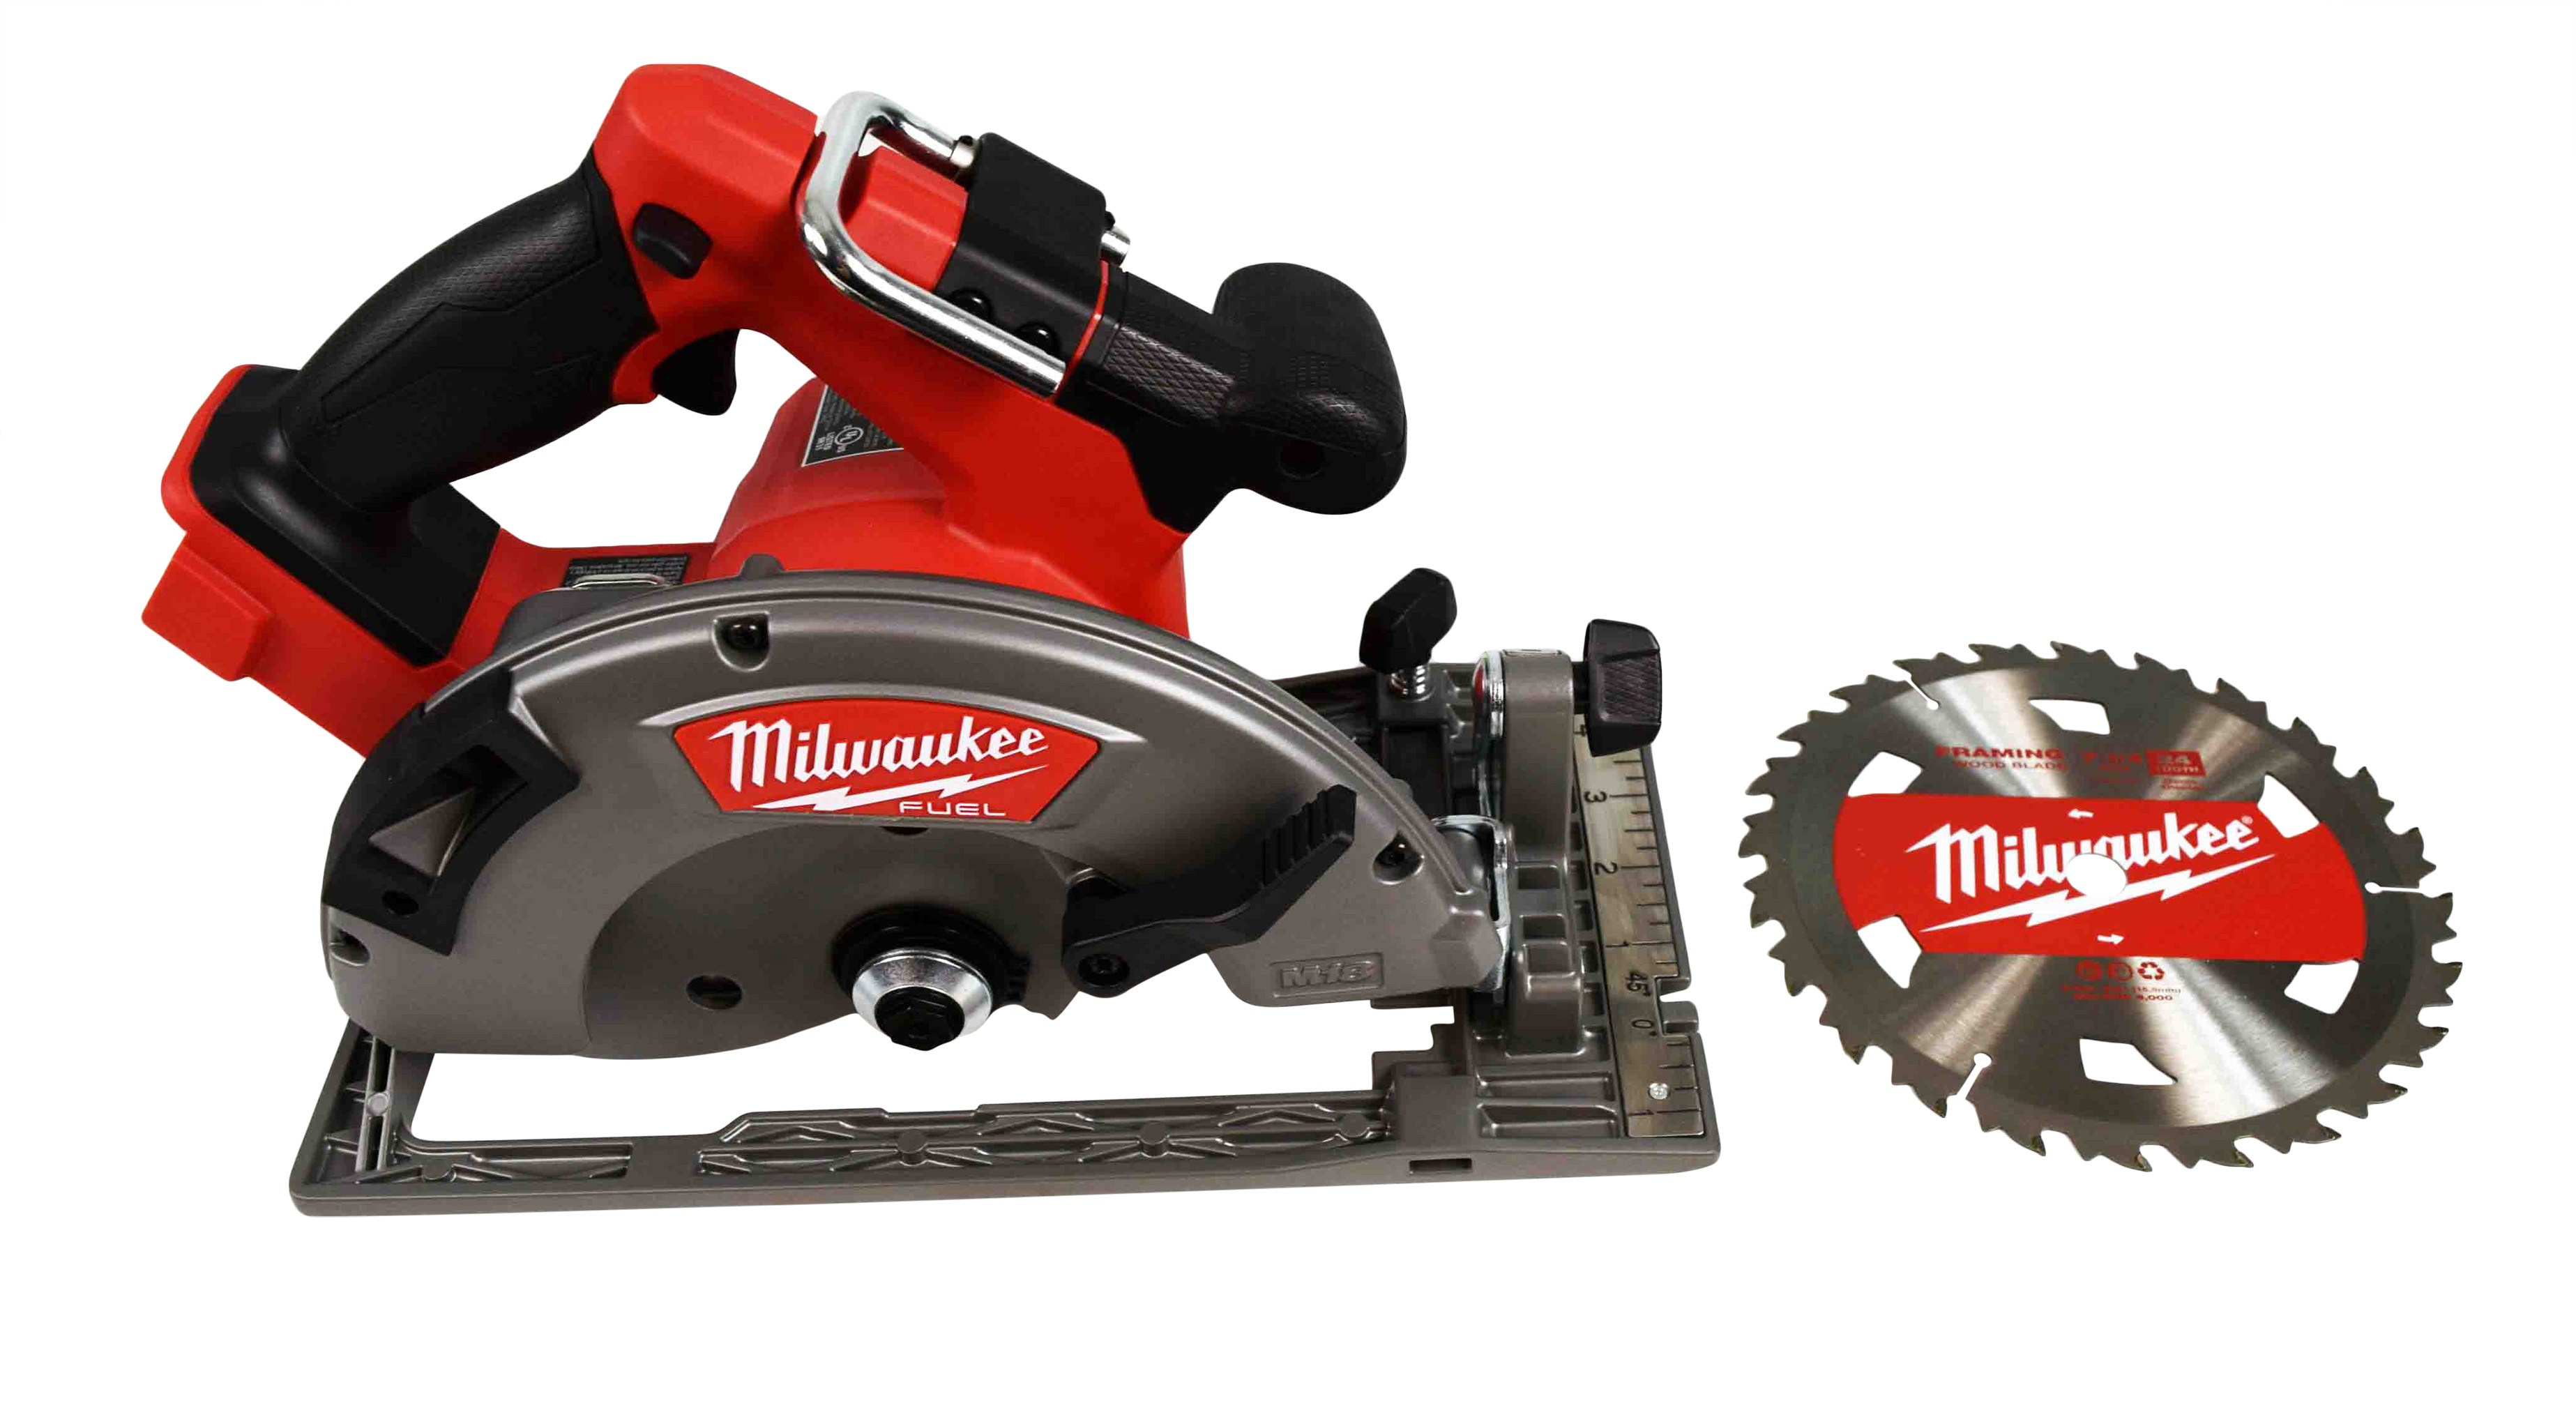 Milwaukee M18 18V Fuel 7-1/4" Circular Saw Kit 2732-21HD with 12Ah Battery, Charger, Contractor Tool Bag - image 2 of 9